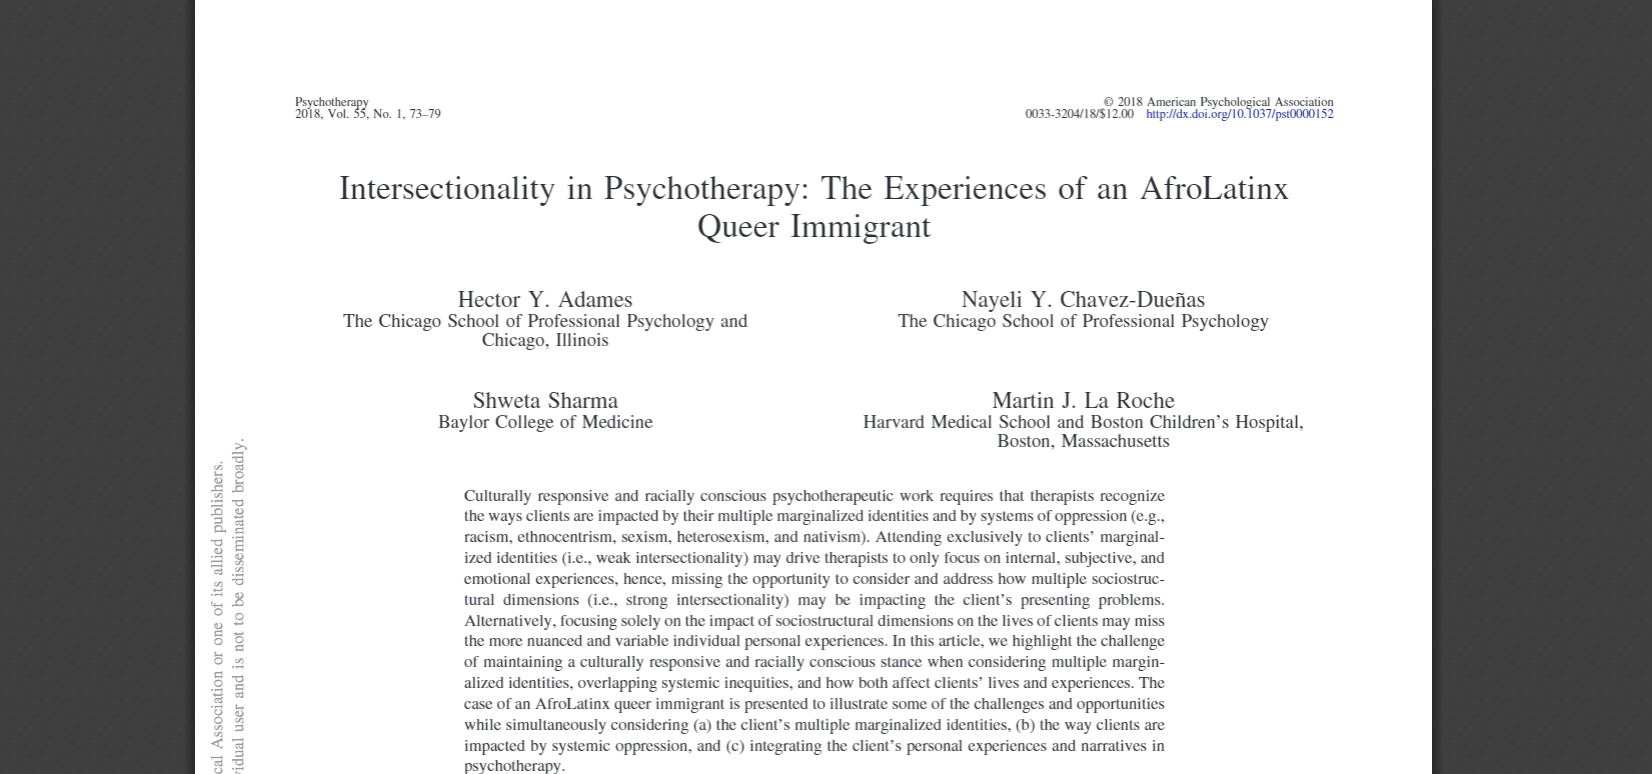 Intersectionality in Psychotherapy: The Experiences of an AfroLatinx Queer Immigrant